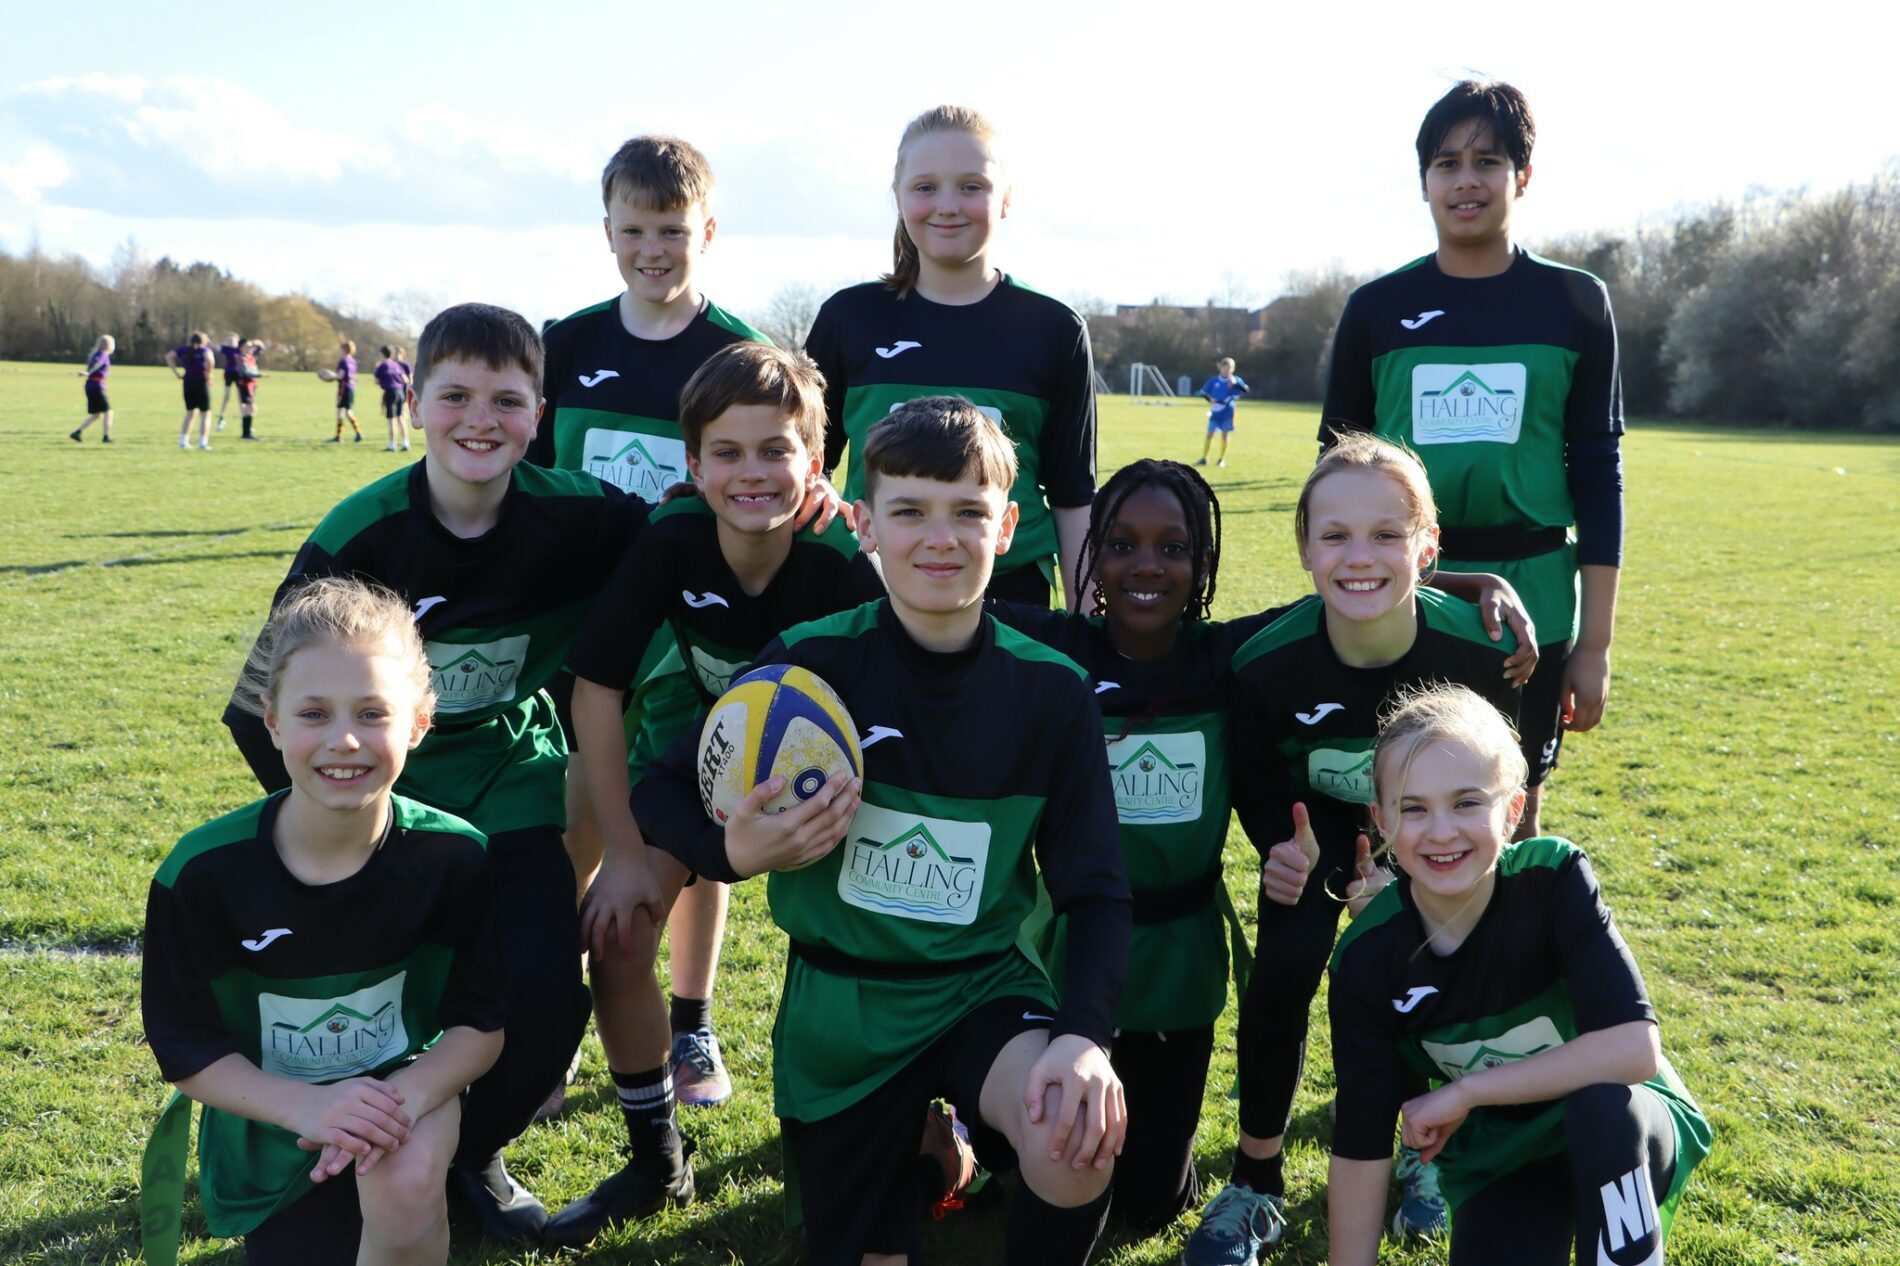 halling tag rugby team for aletheia academies trust tag rugby event